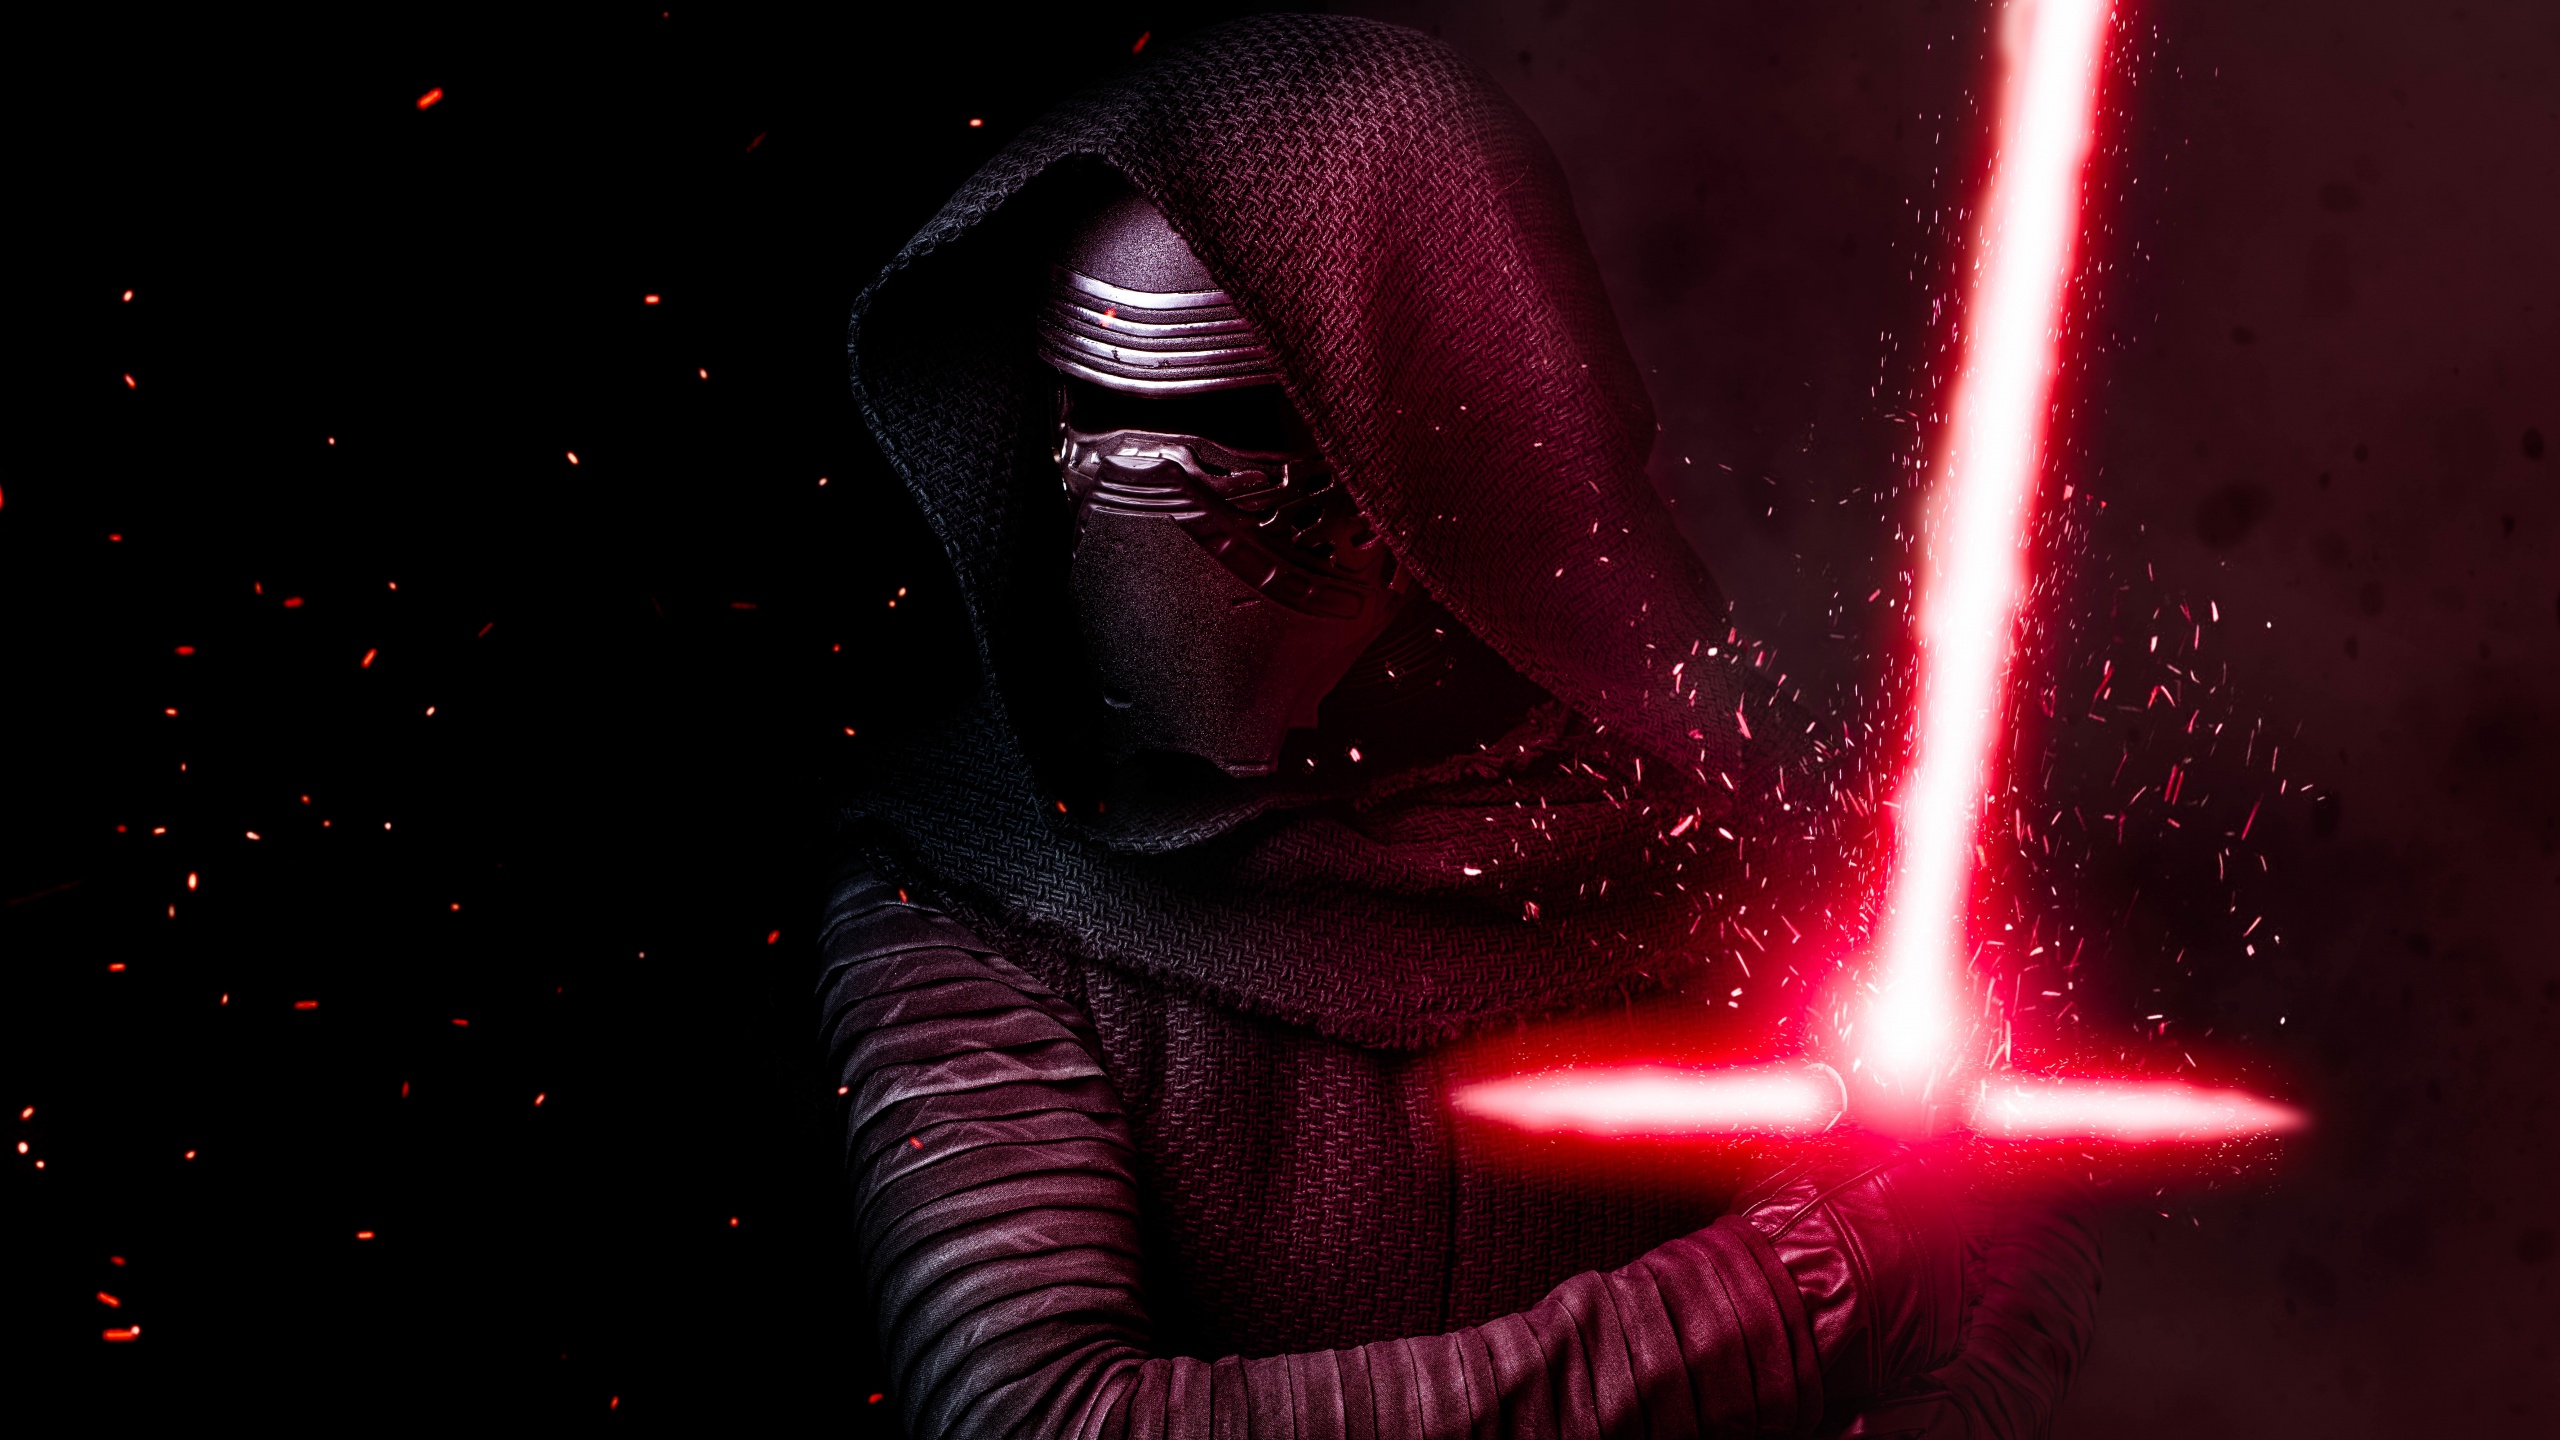 Wallpaper : Star Wars, red, Kylo Ren, darkness, screenshot, computer  wallpaper, fictional character, special effects, 6600x3600 px 6600x3600 -  CoolWallpapers - 632210 - HD Wallpapers - WallHere